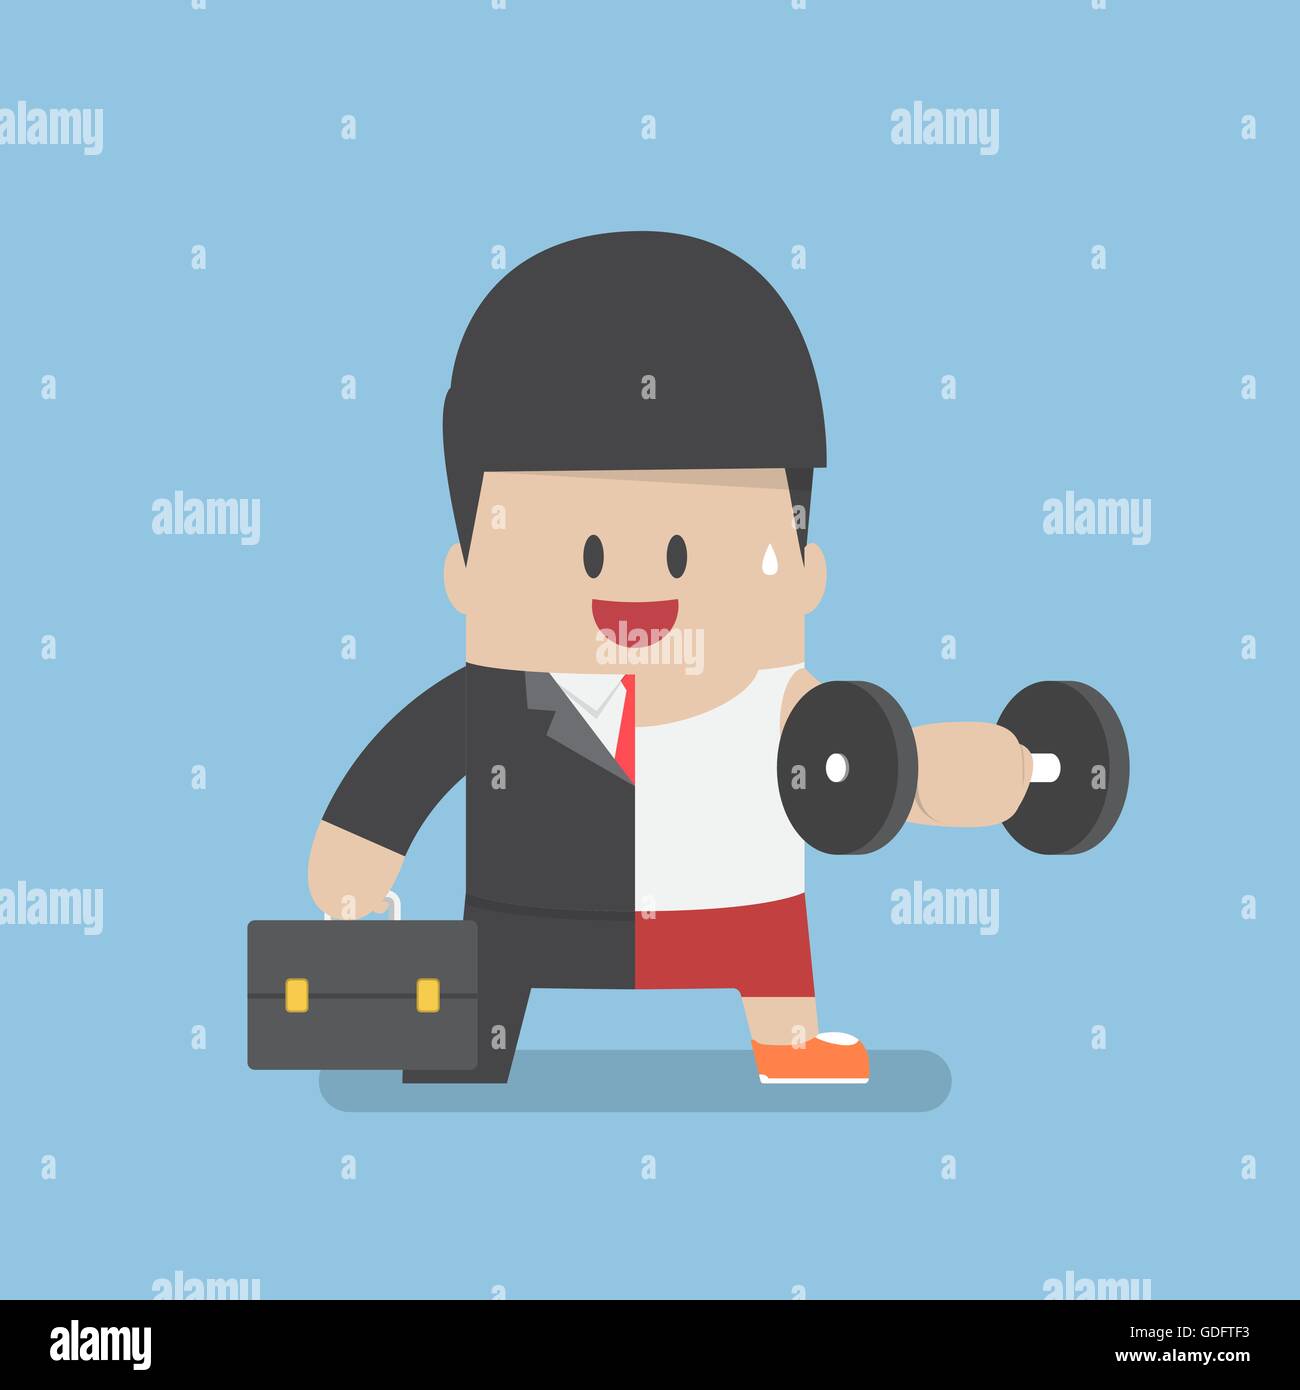 19,149 Arm Dumbbell Workout Illustration Images, Stock Photos, 3D objects,  & Vectors